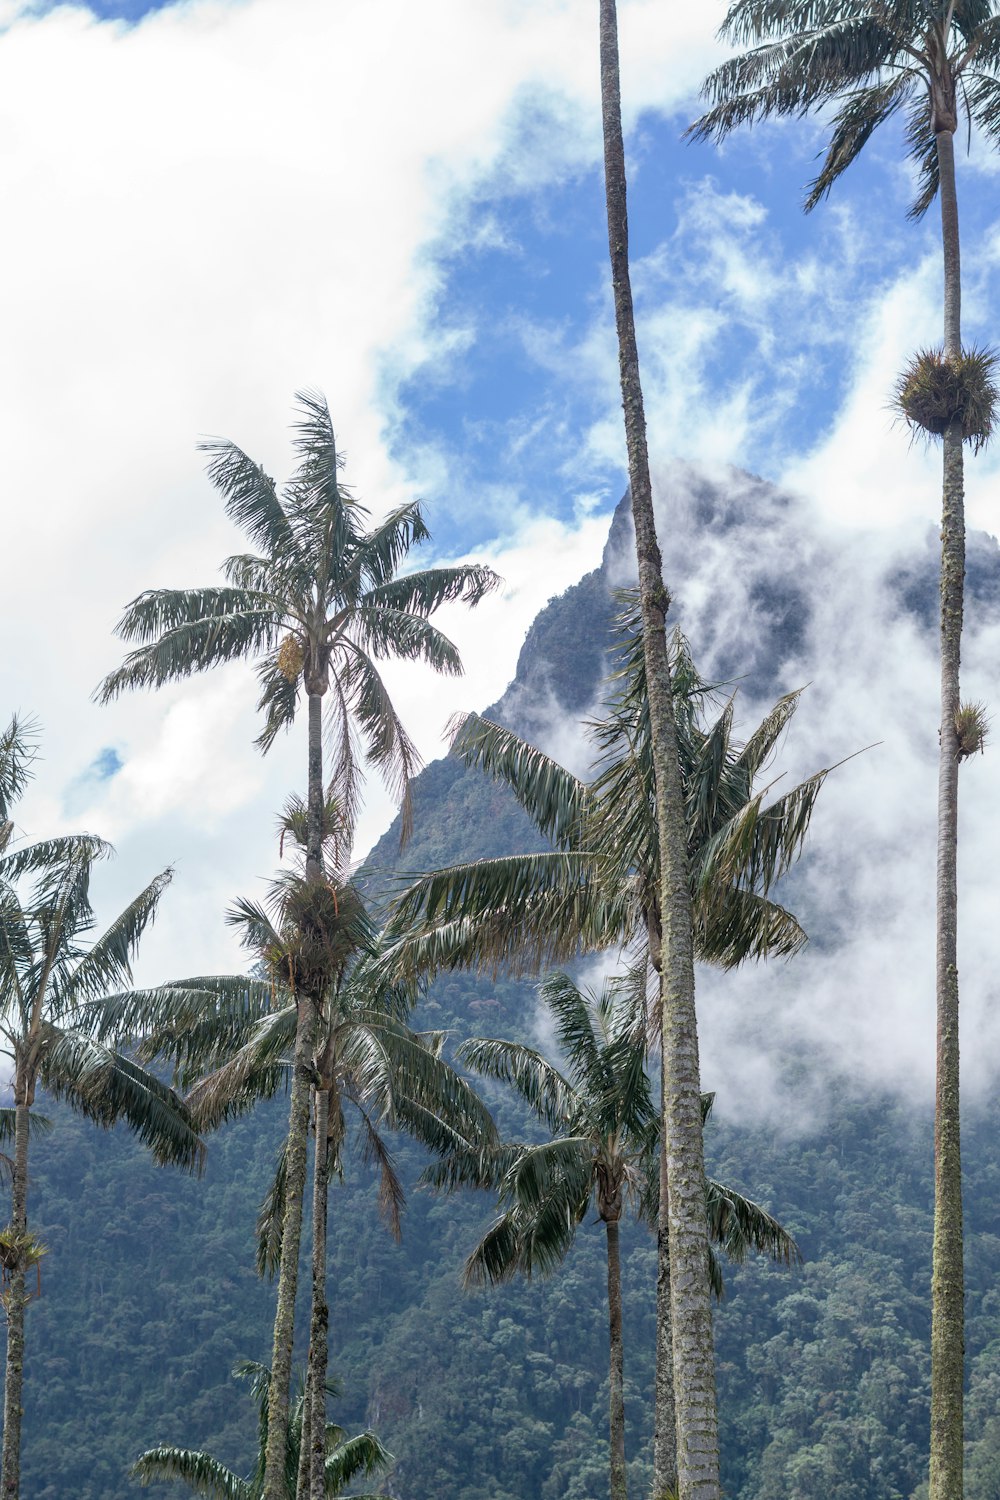 a group of palm trees with a mountain in the background